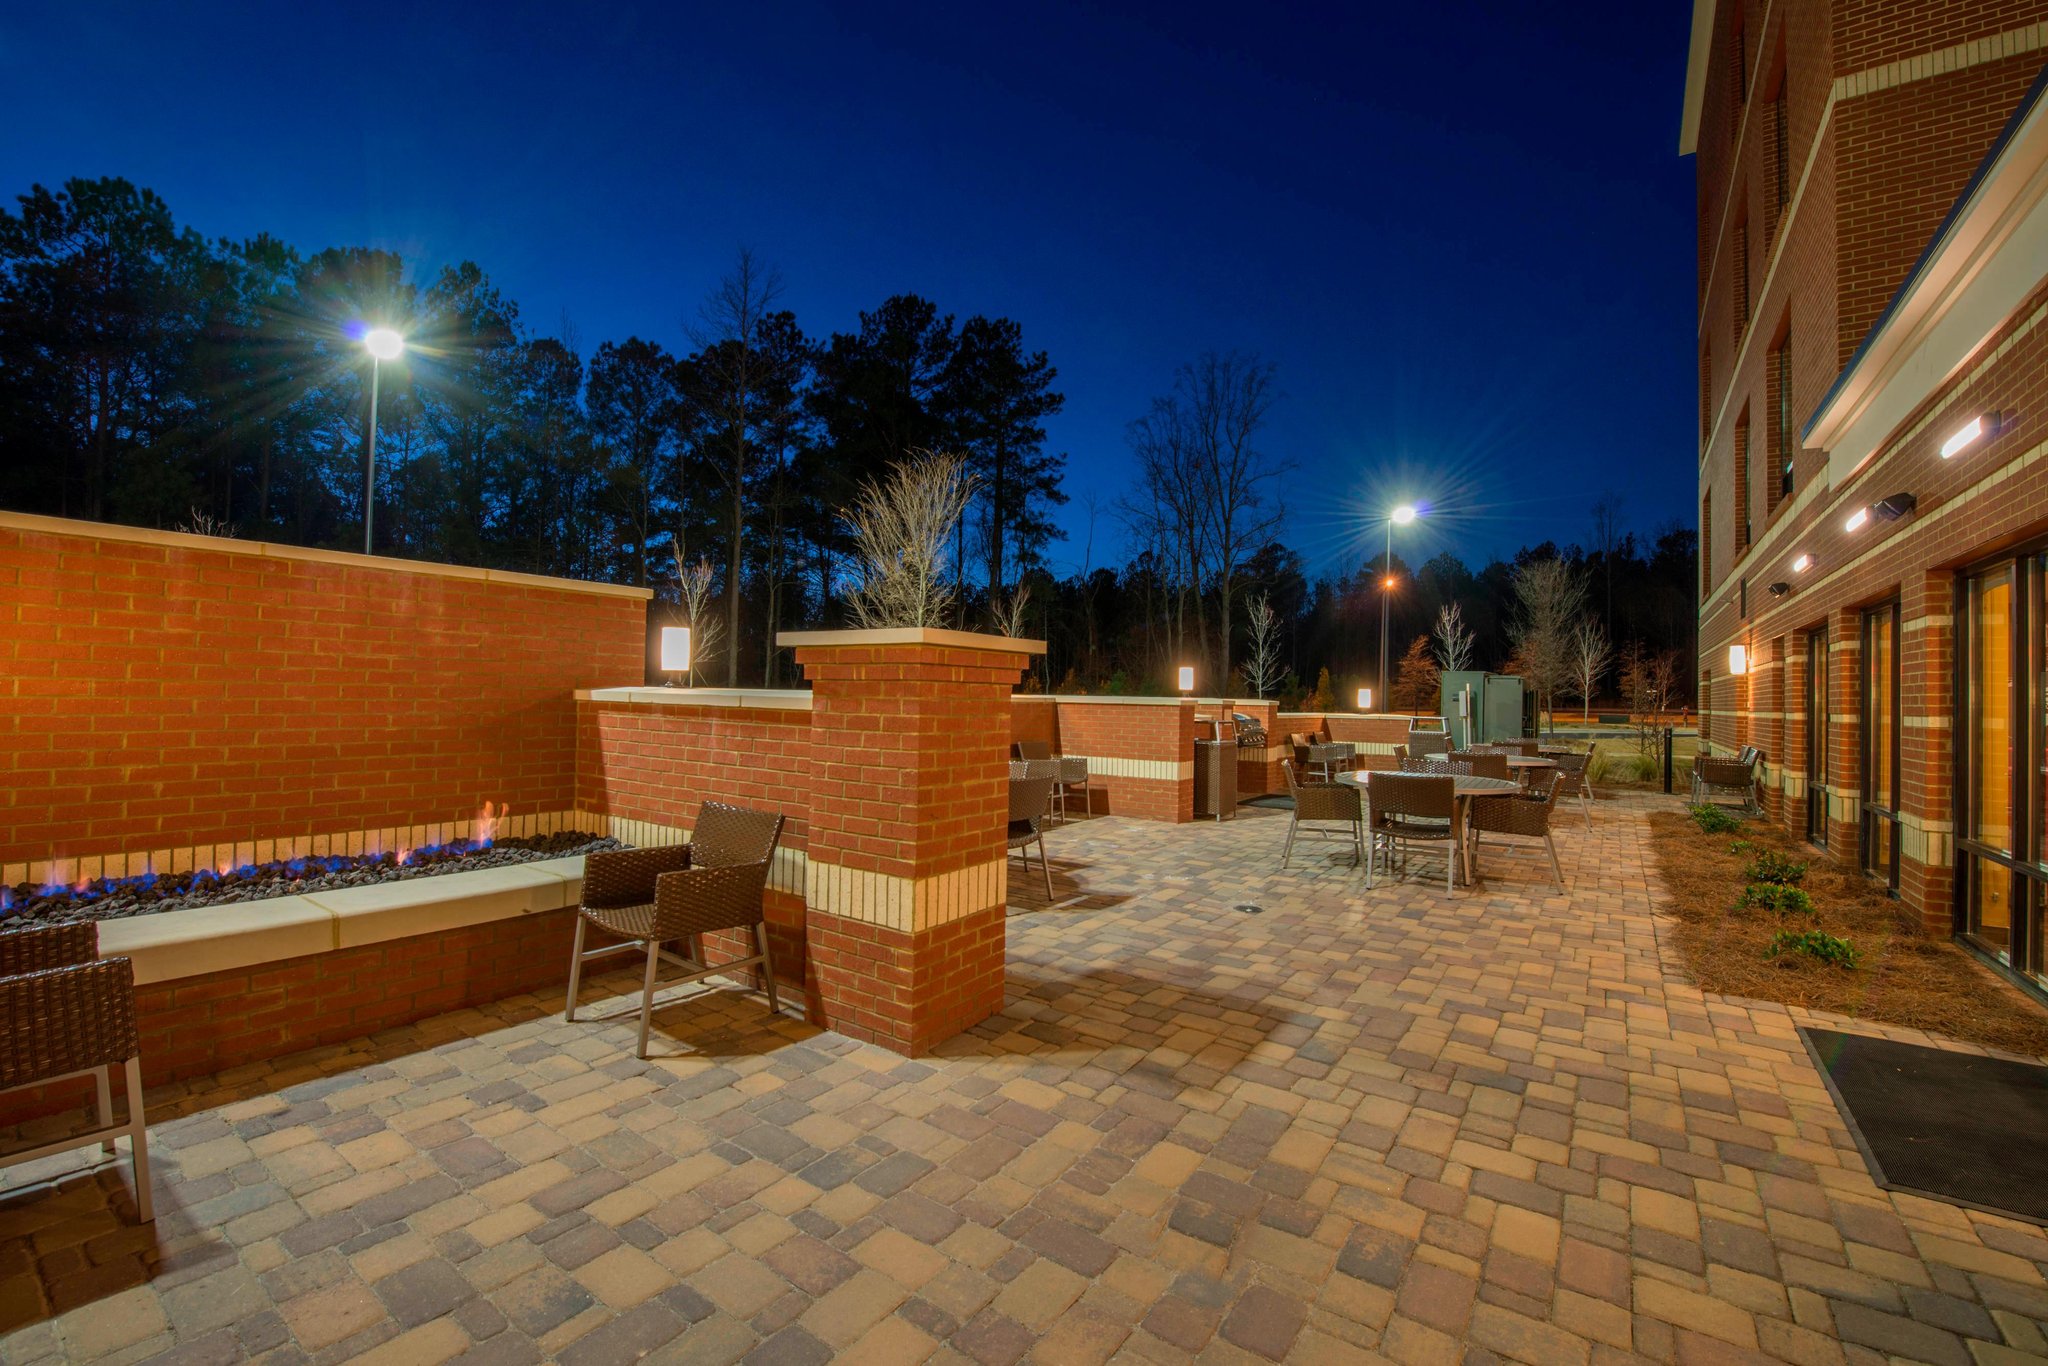 TownePlace Suites Newnan